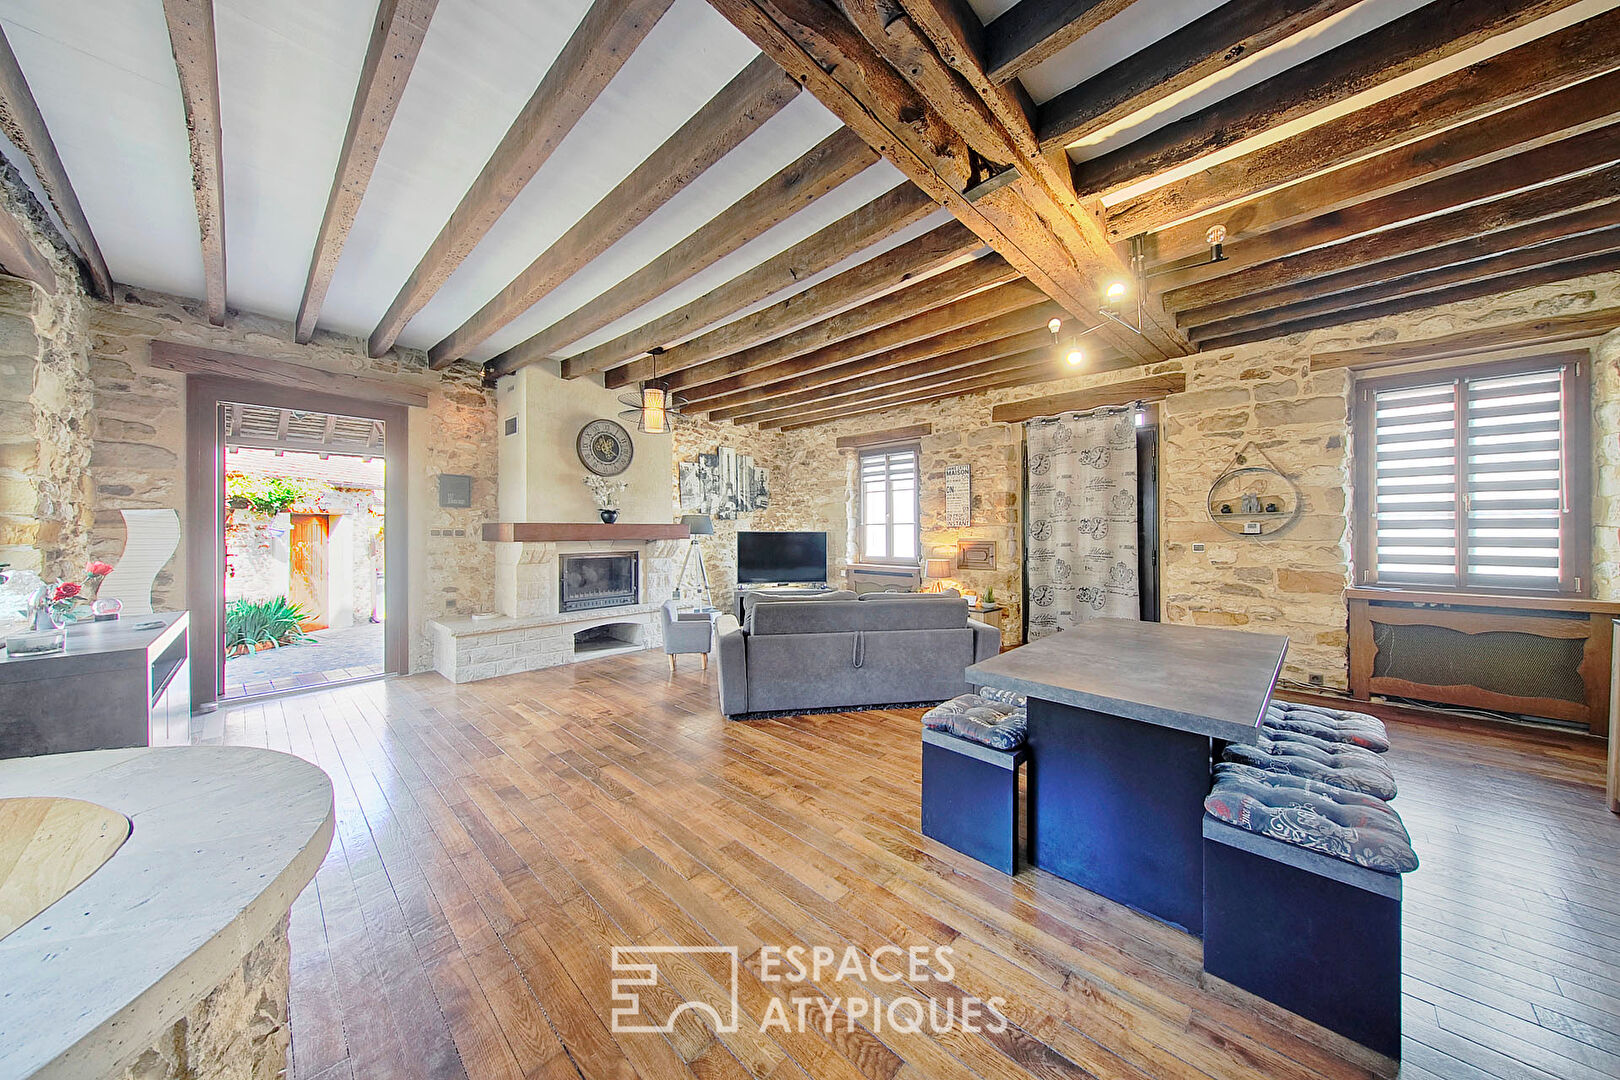 Charming townhouse with inner courtyard and outbuilding